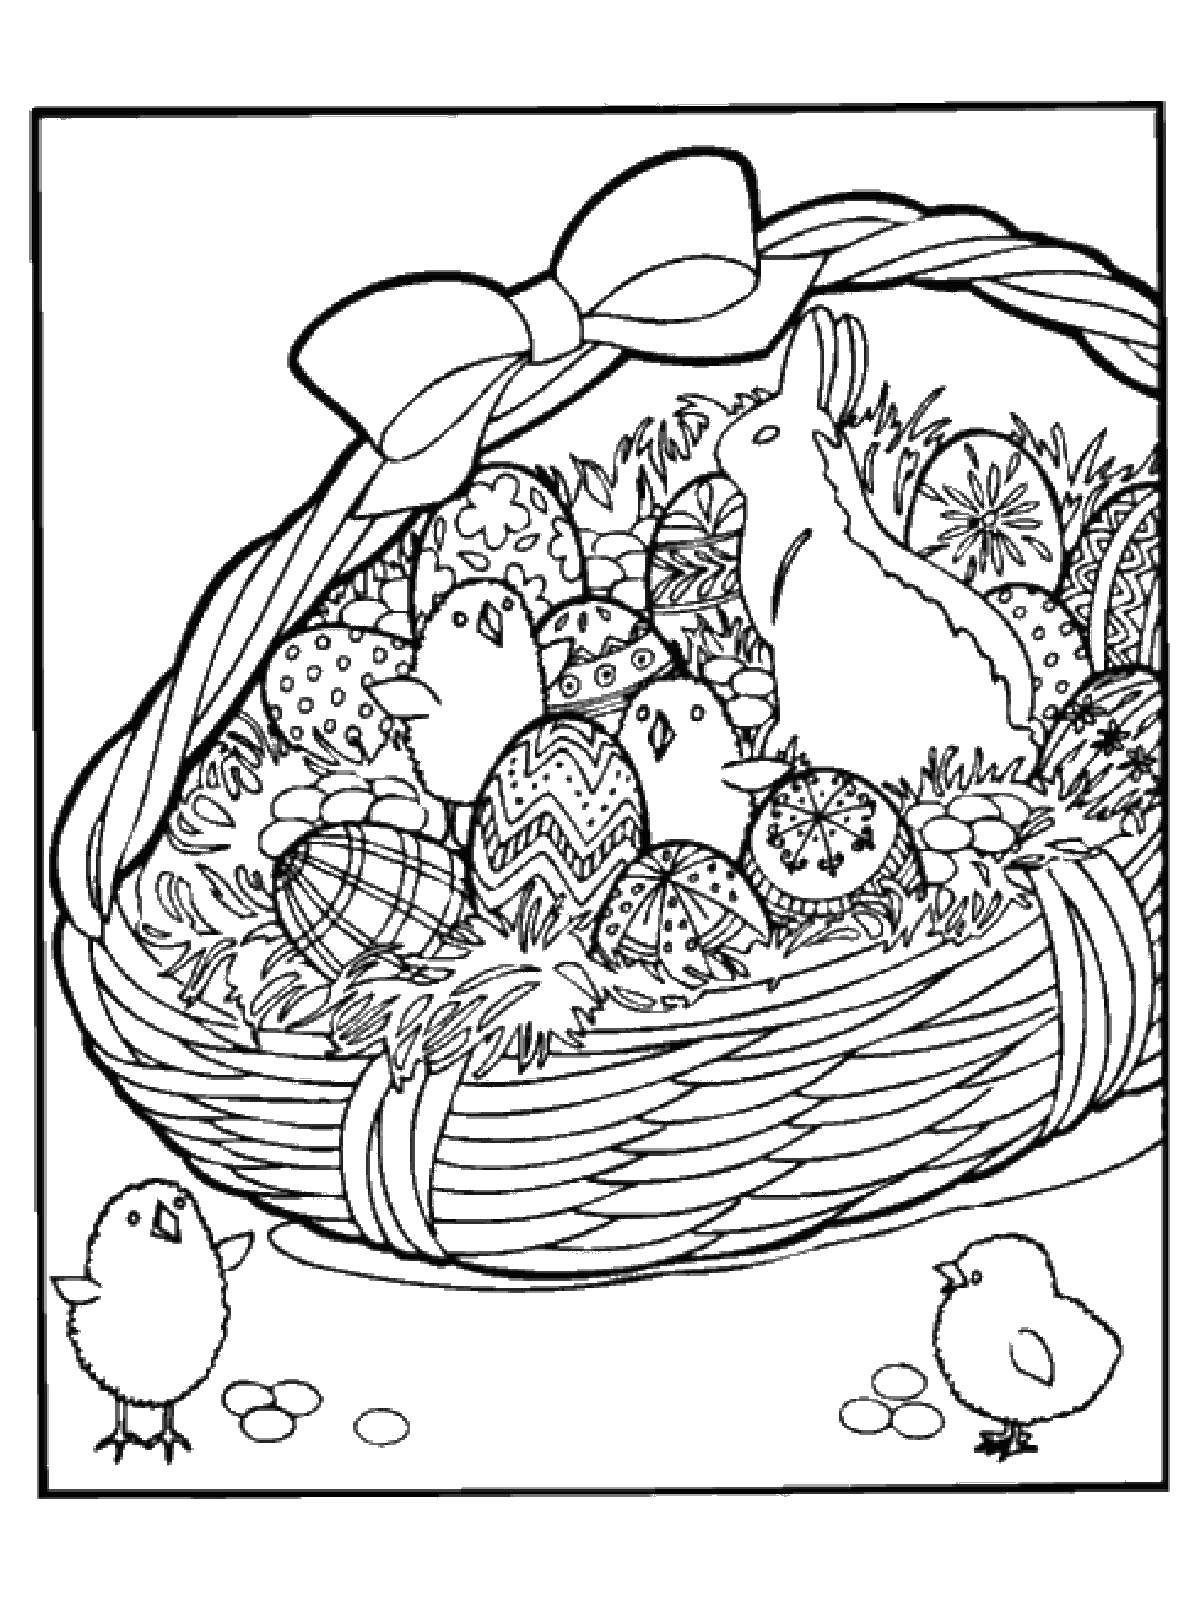 Coloring Basket with Chicks and eggs. Category coloring Easter. Tags:  Easter, eggs, chickens.